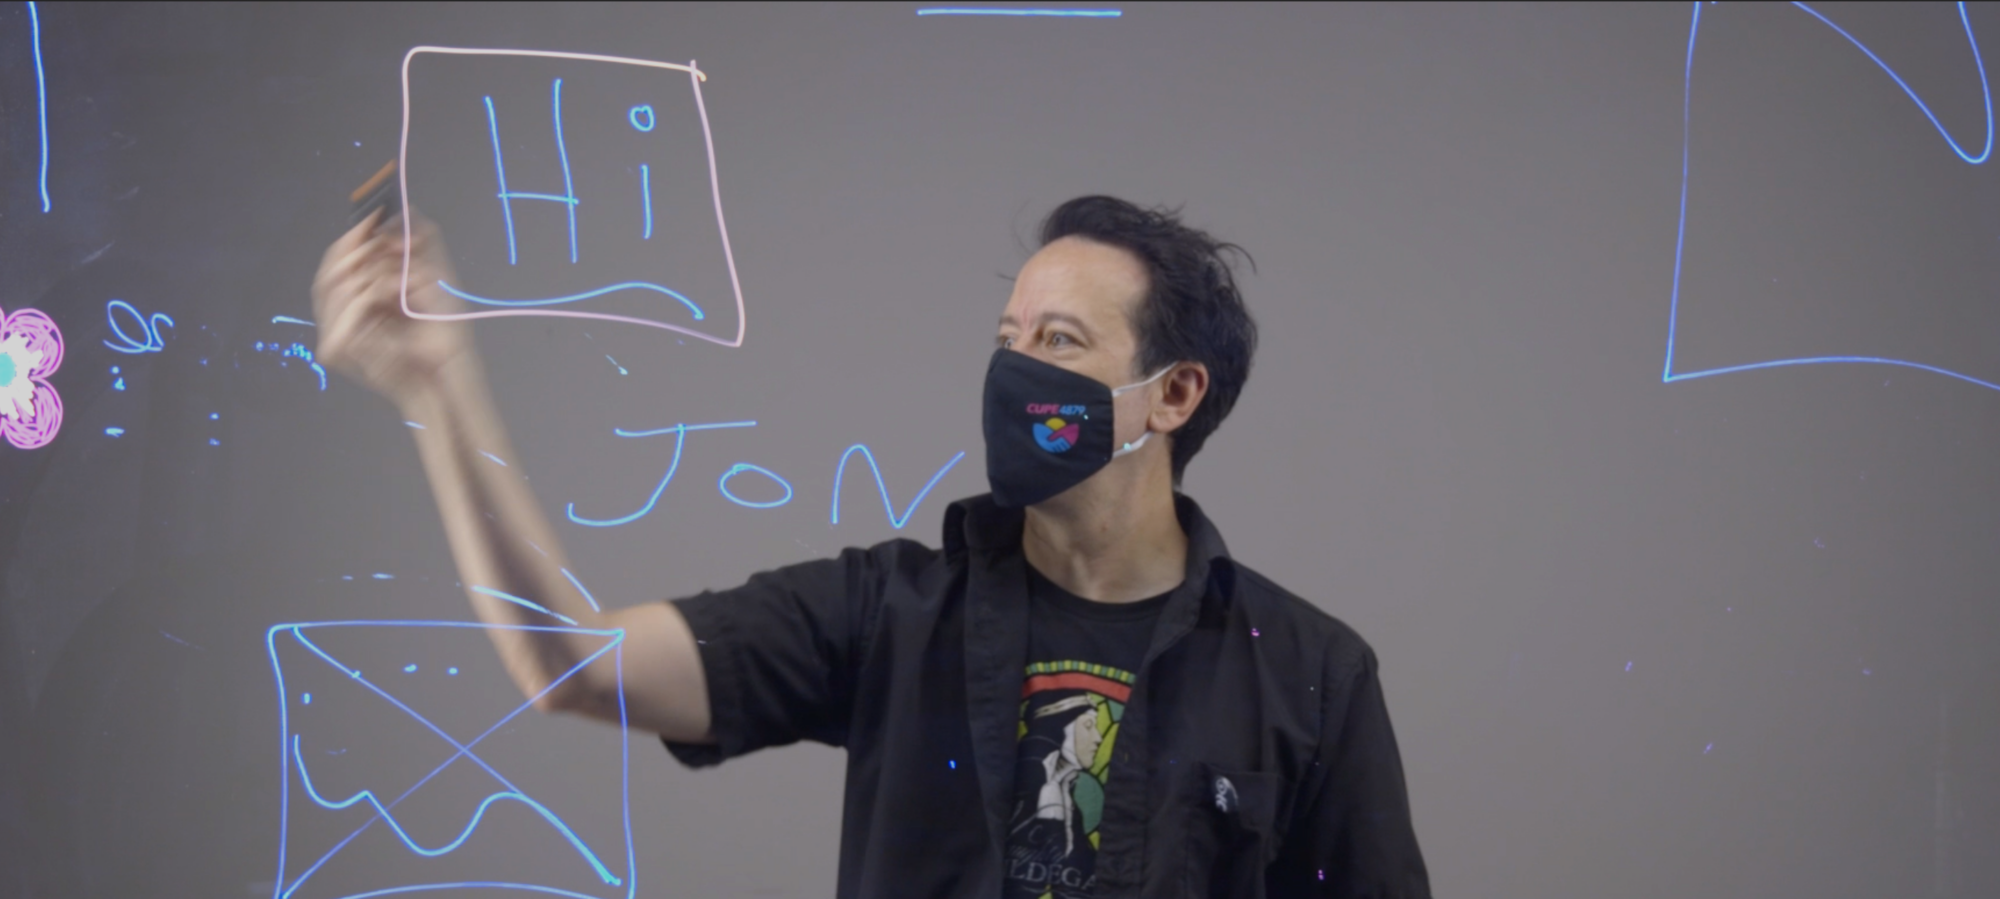 Live Lightboard Lectures